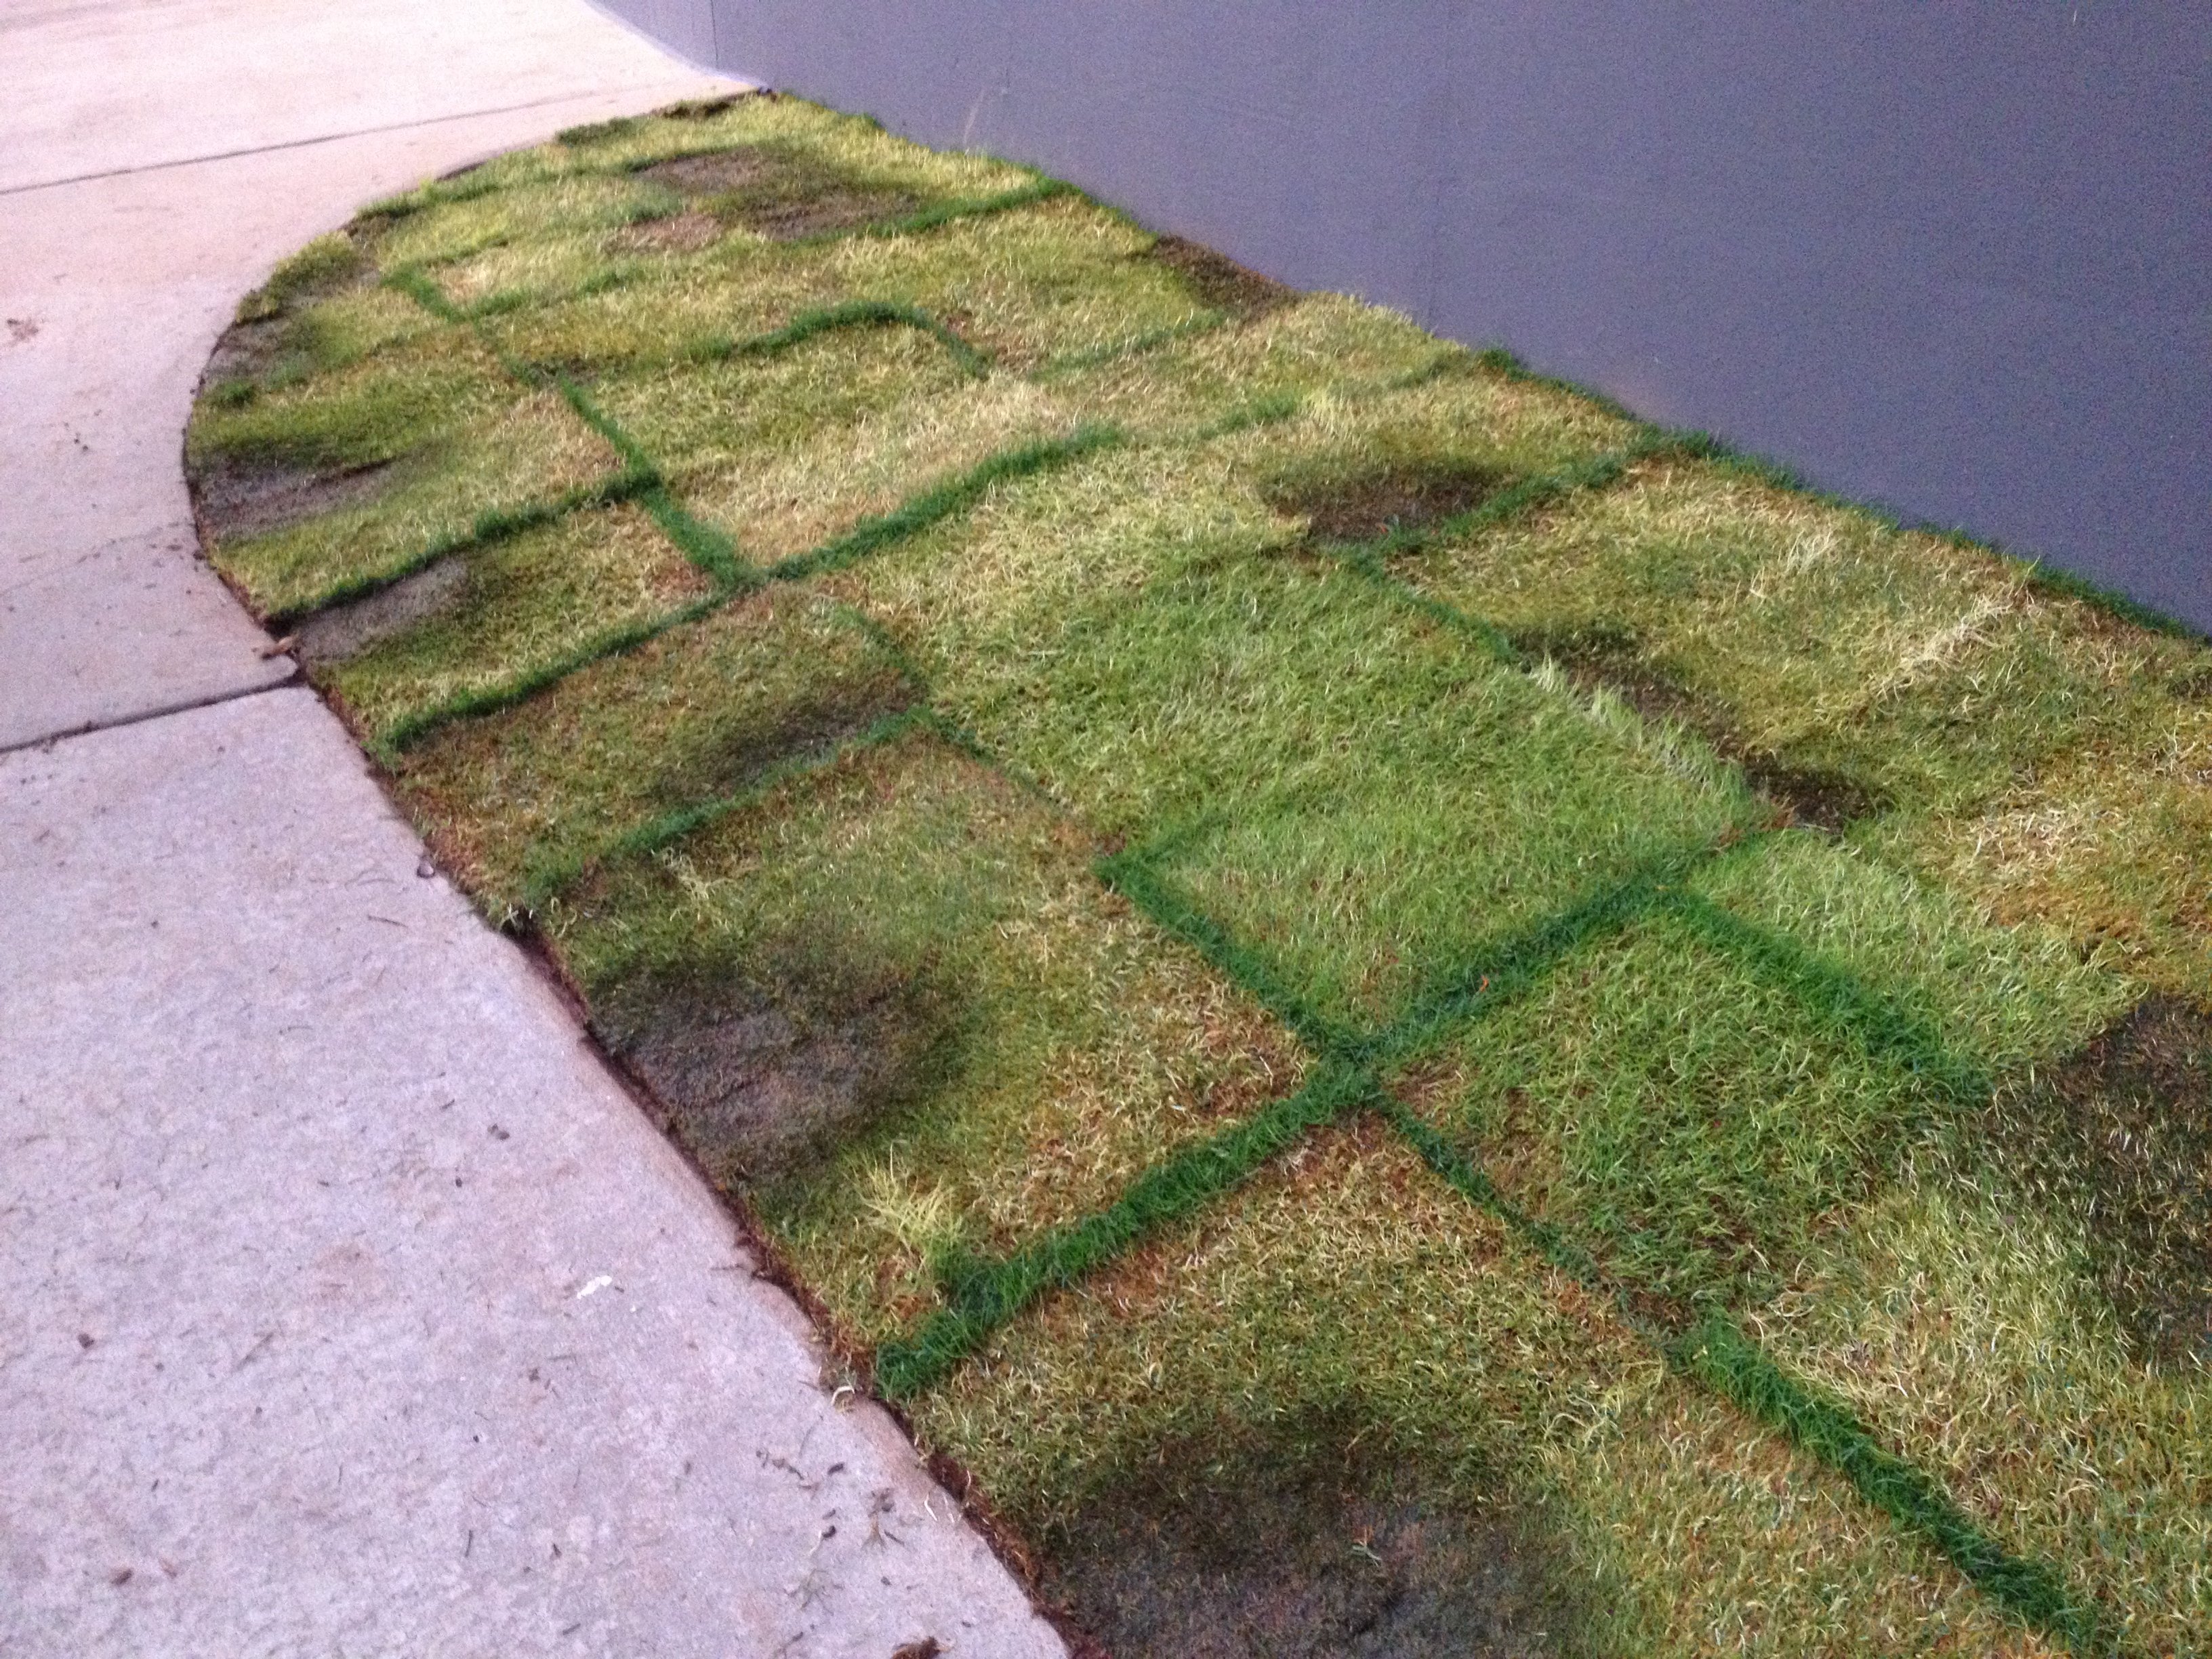 sod left on pallet too long - recovered eventually